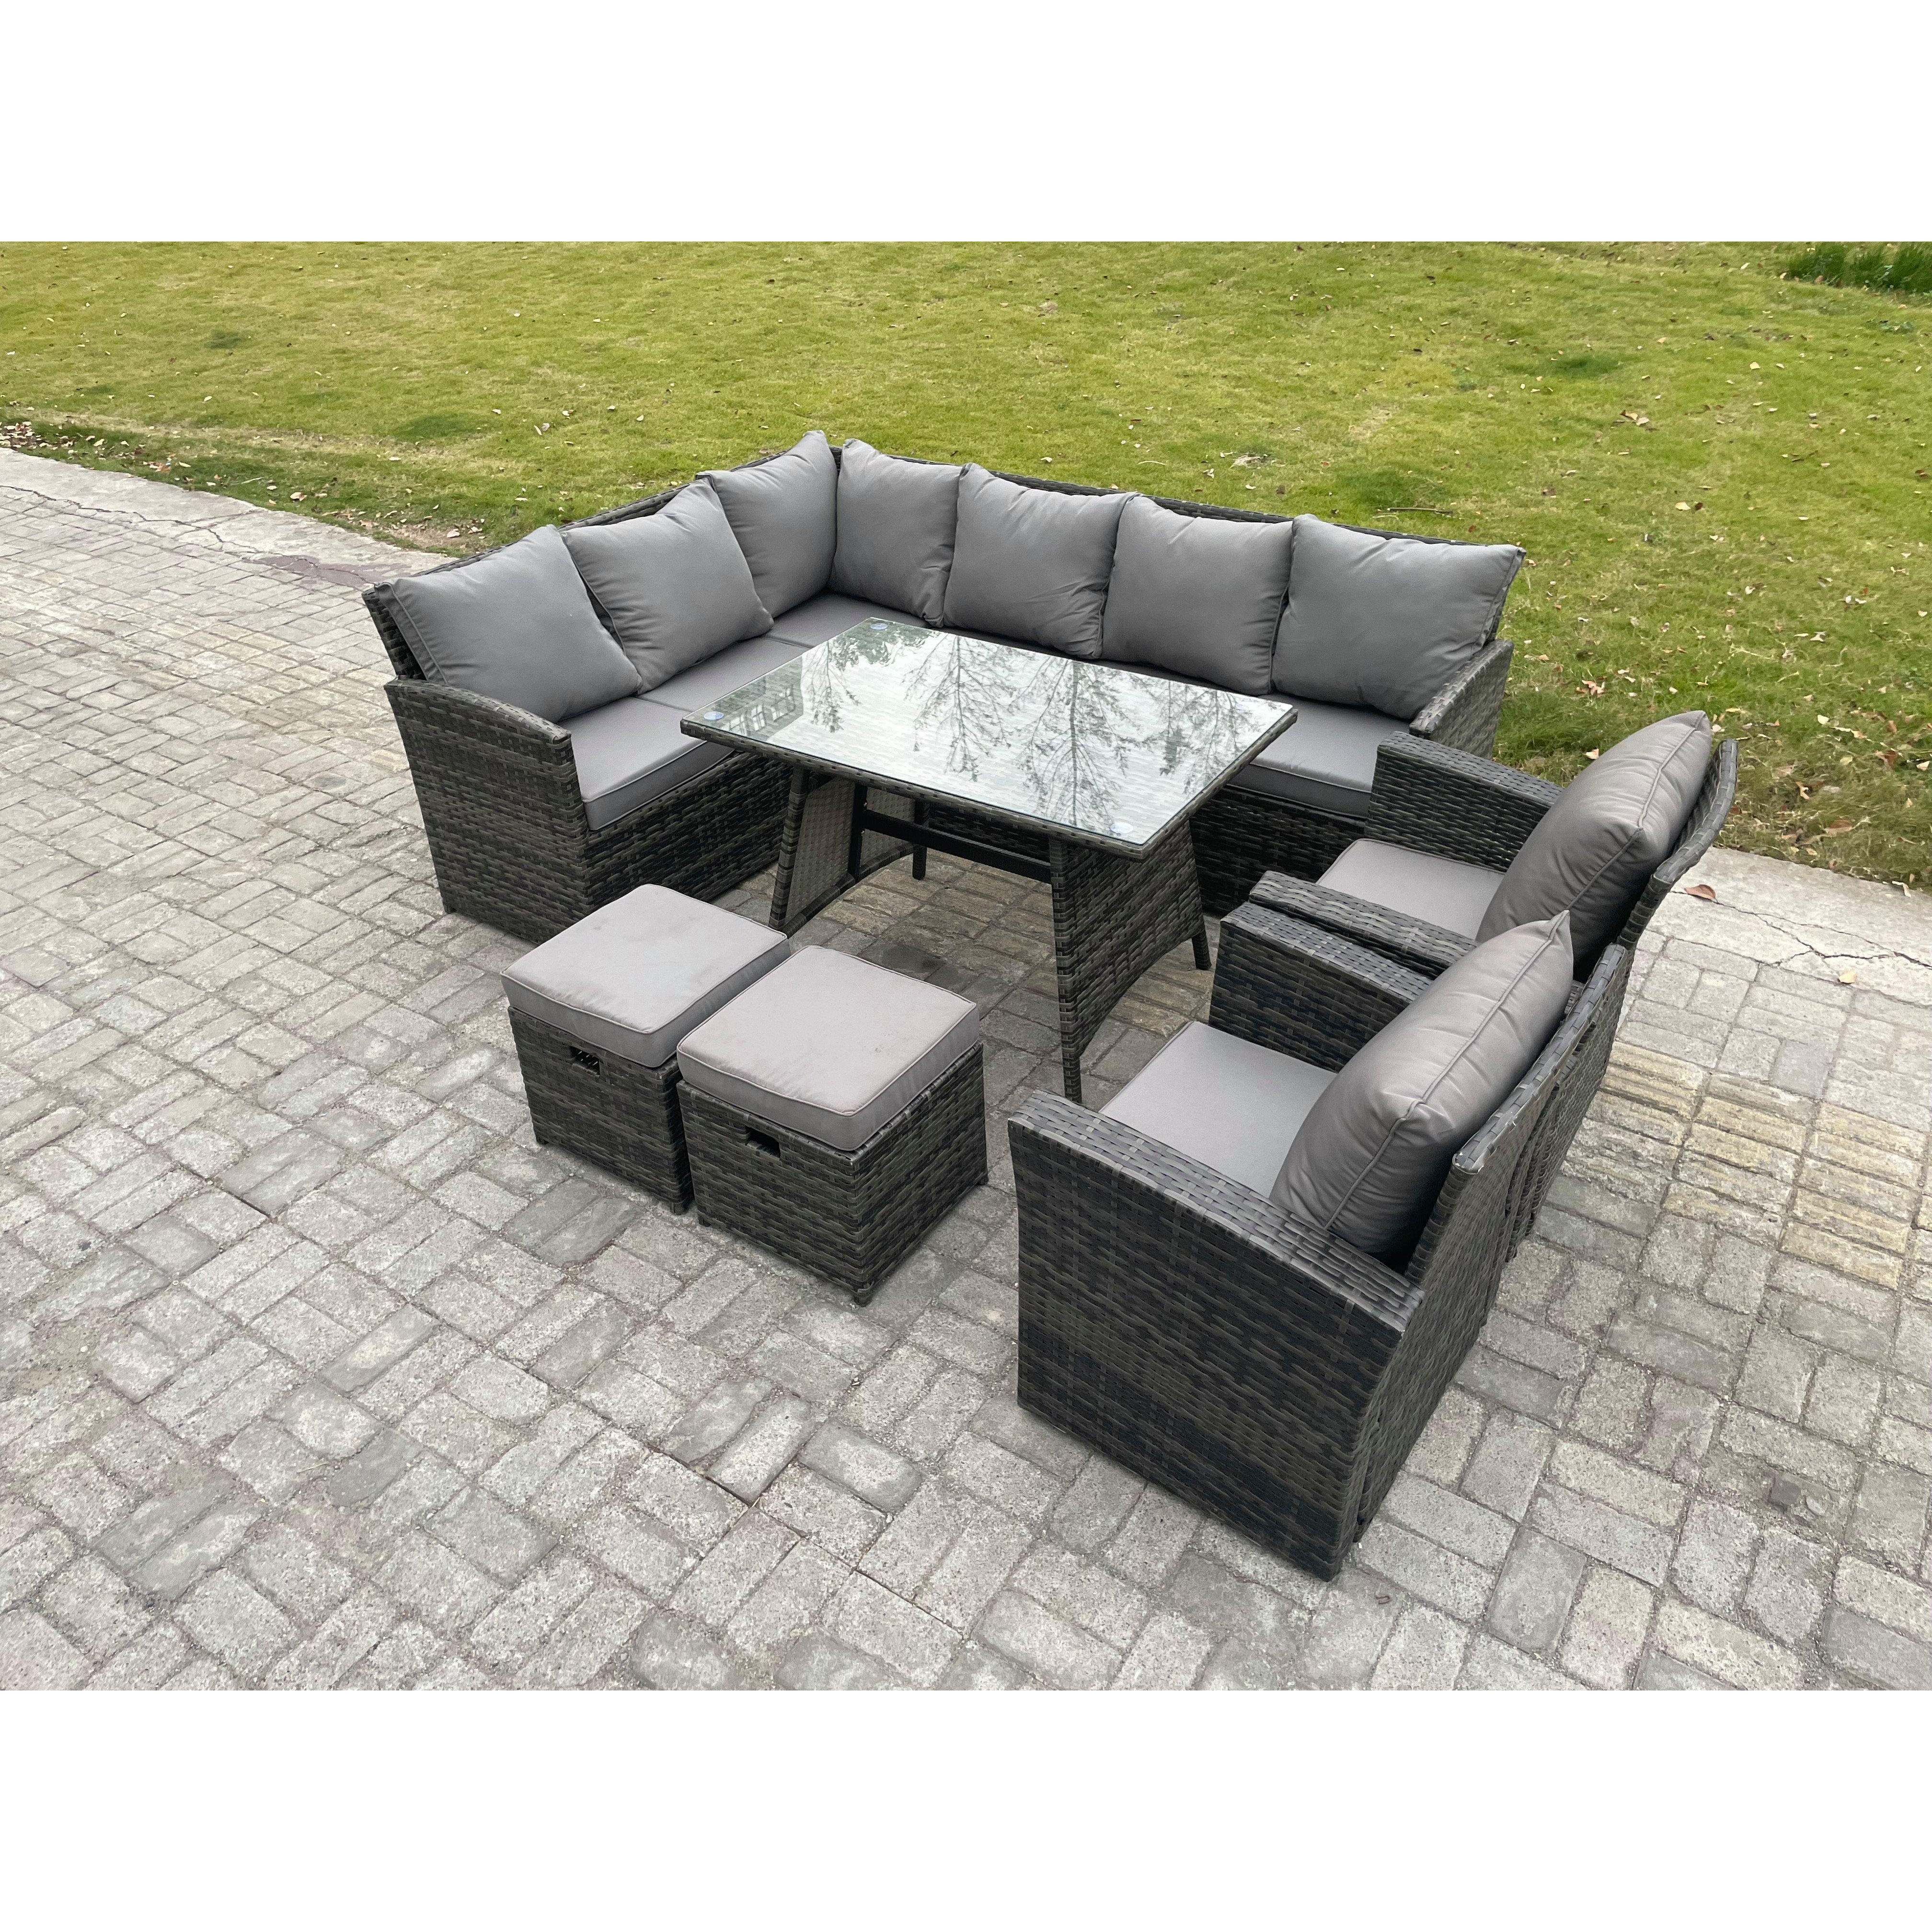 Rattan Garden Furniture Corner Sofa Set with Oblong Dining Table 2 Small Footstools 2 Armchairs - image 1